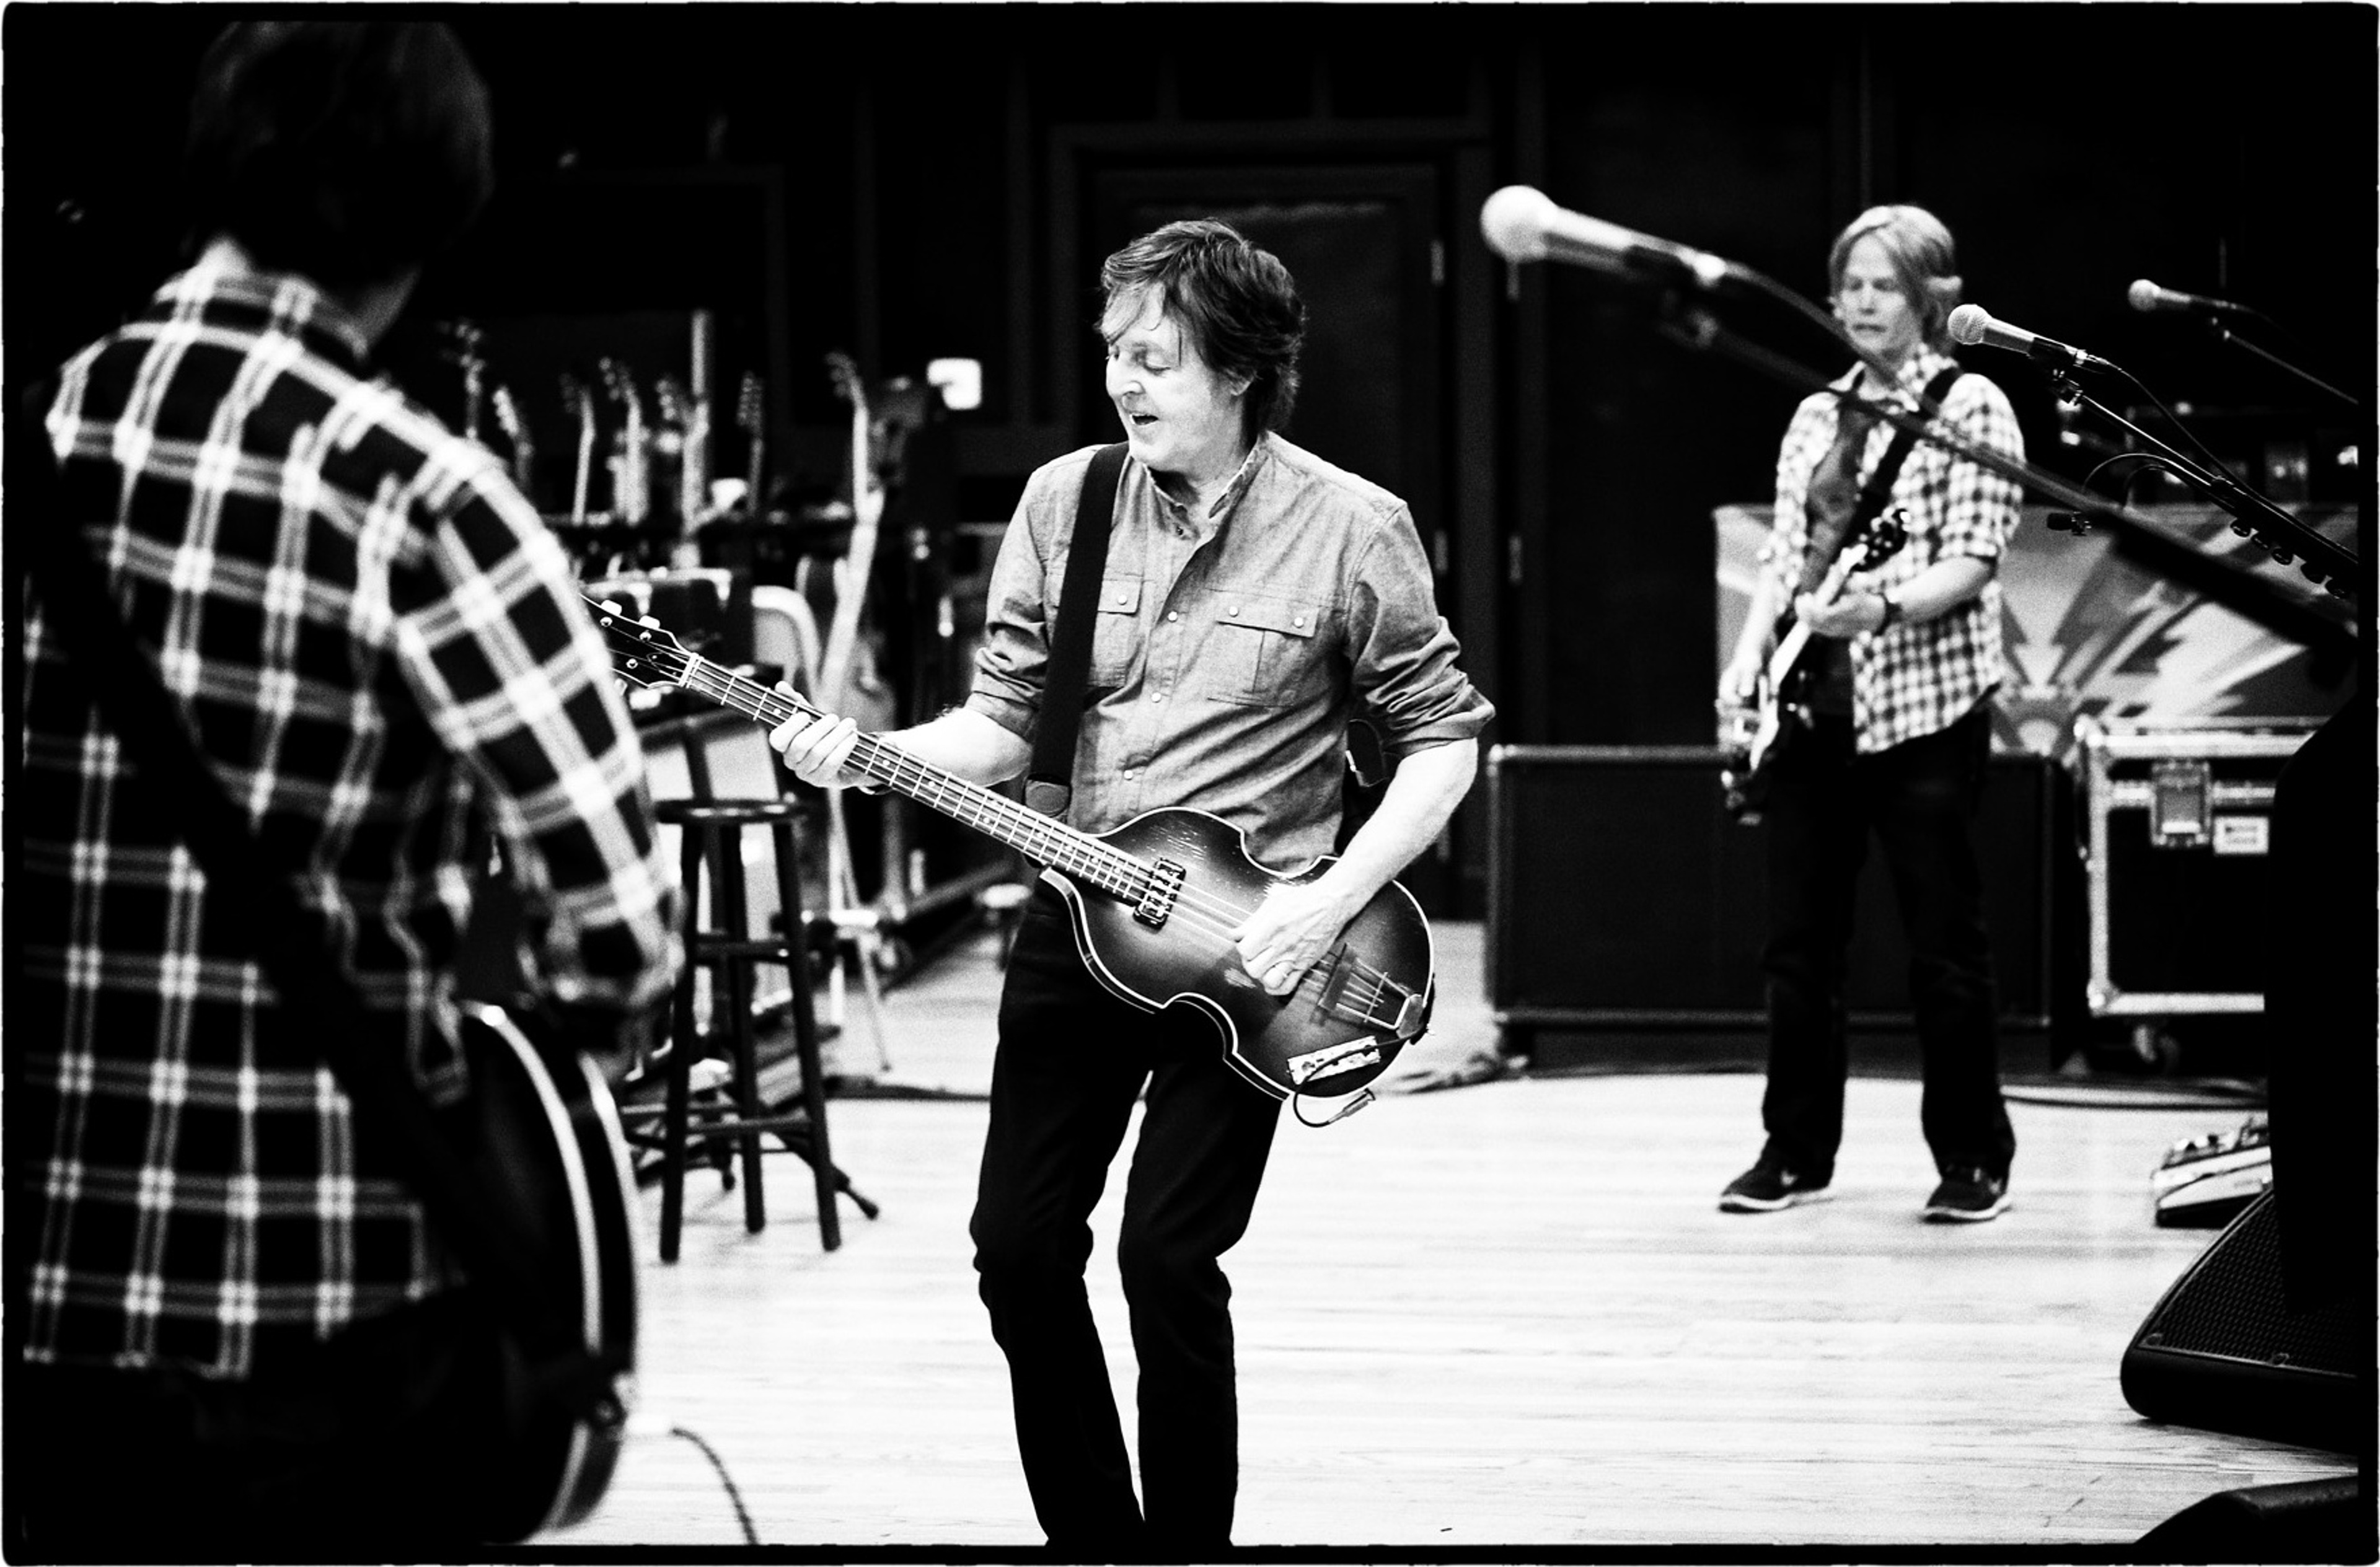 Rusty, Paul and Brian at rehearsals, Los Angeles, April 13th 2013